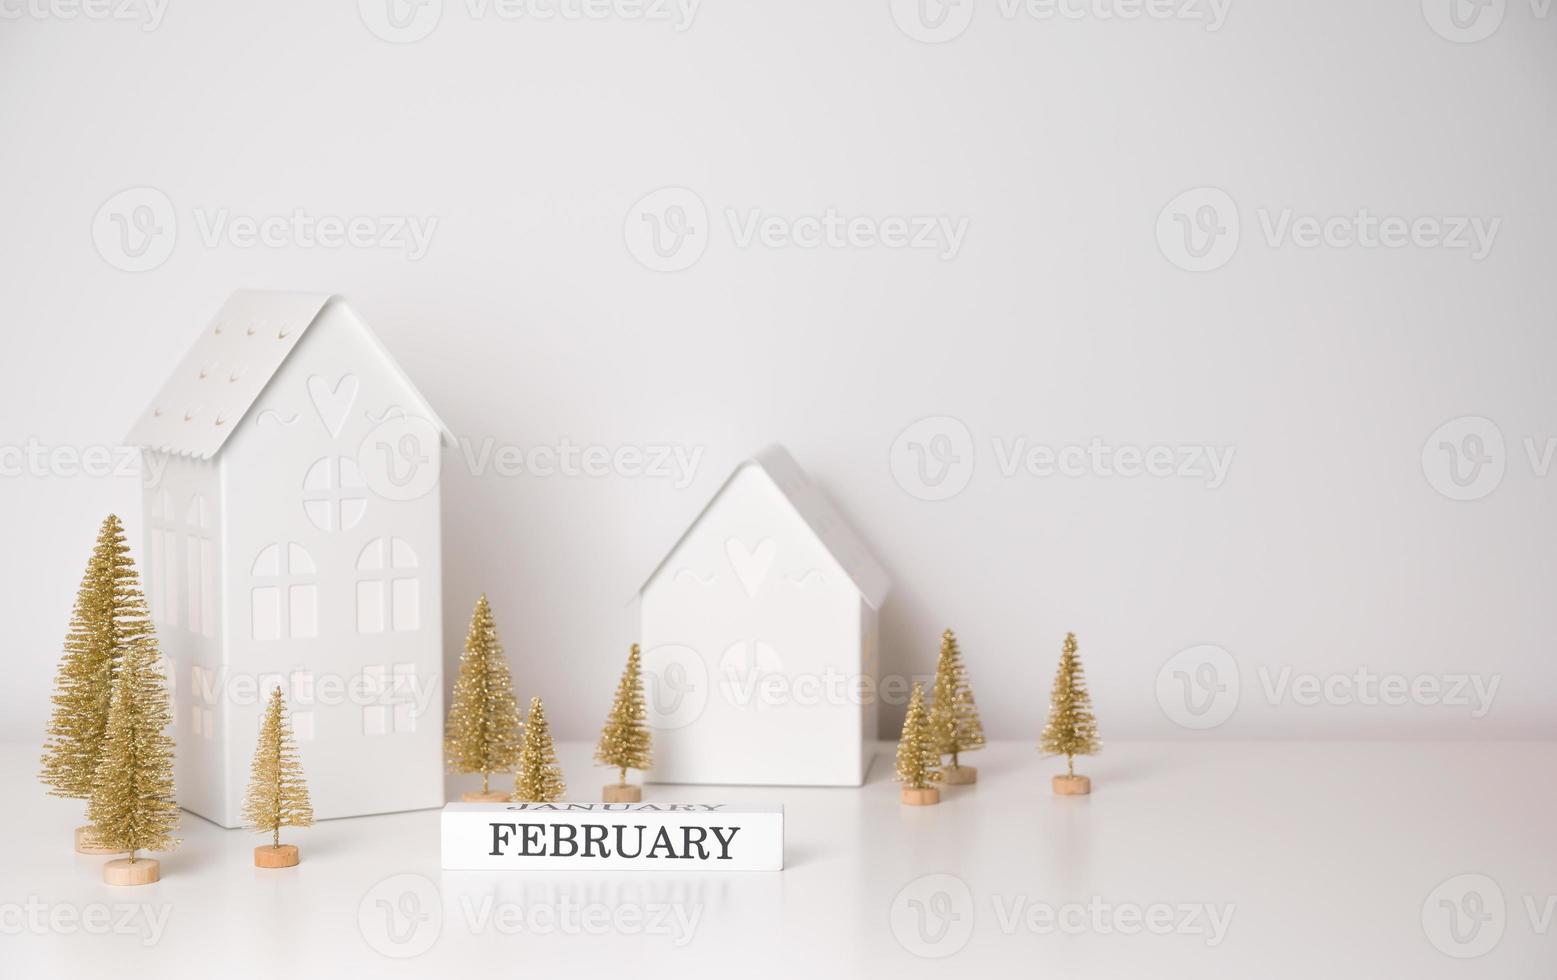 Winter season banner with cozy decorations in white and golden. February sign photo